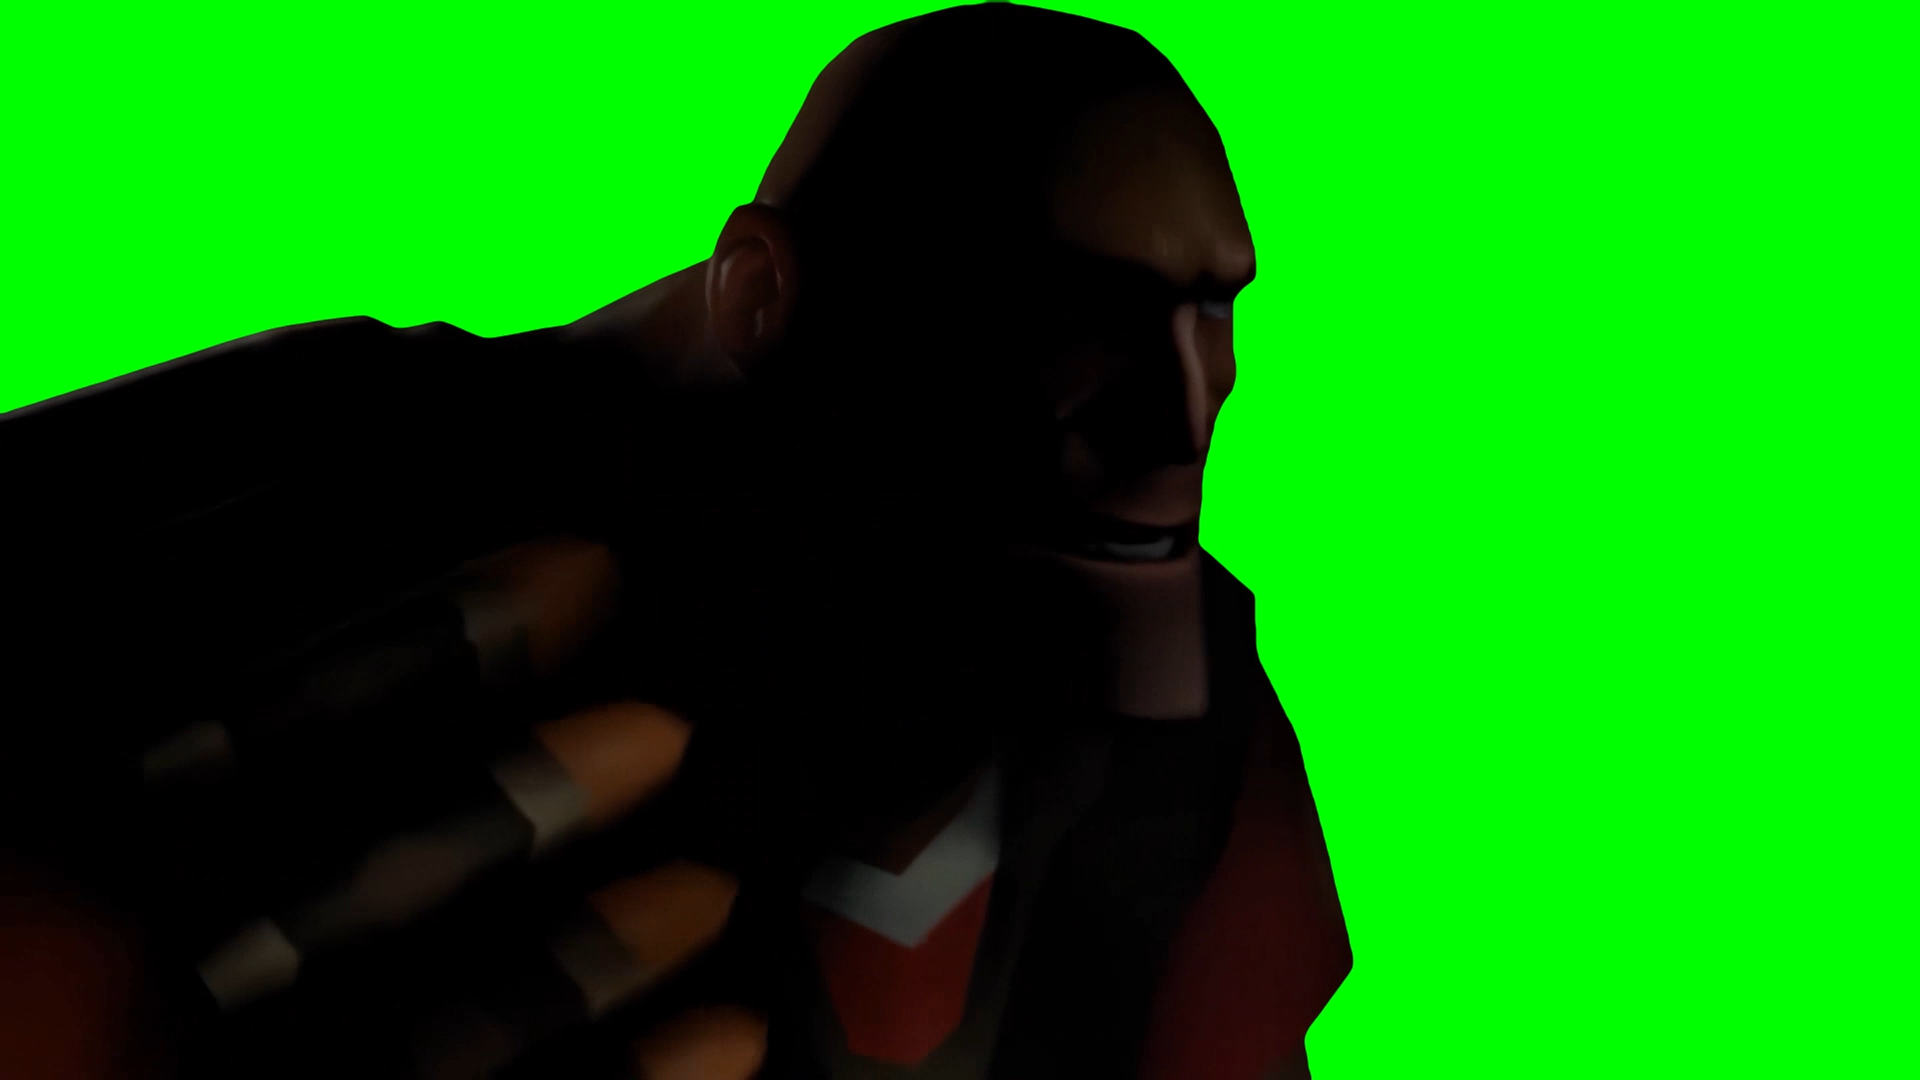 I fear no man, but that thing… It scares me - Team Fortress 2 Heavy meme (Green Screen)